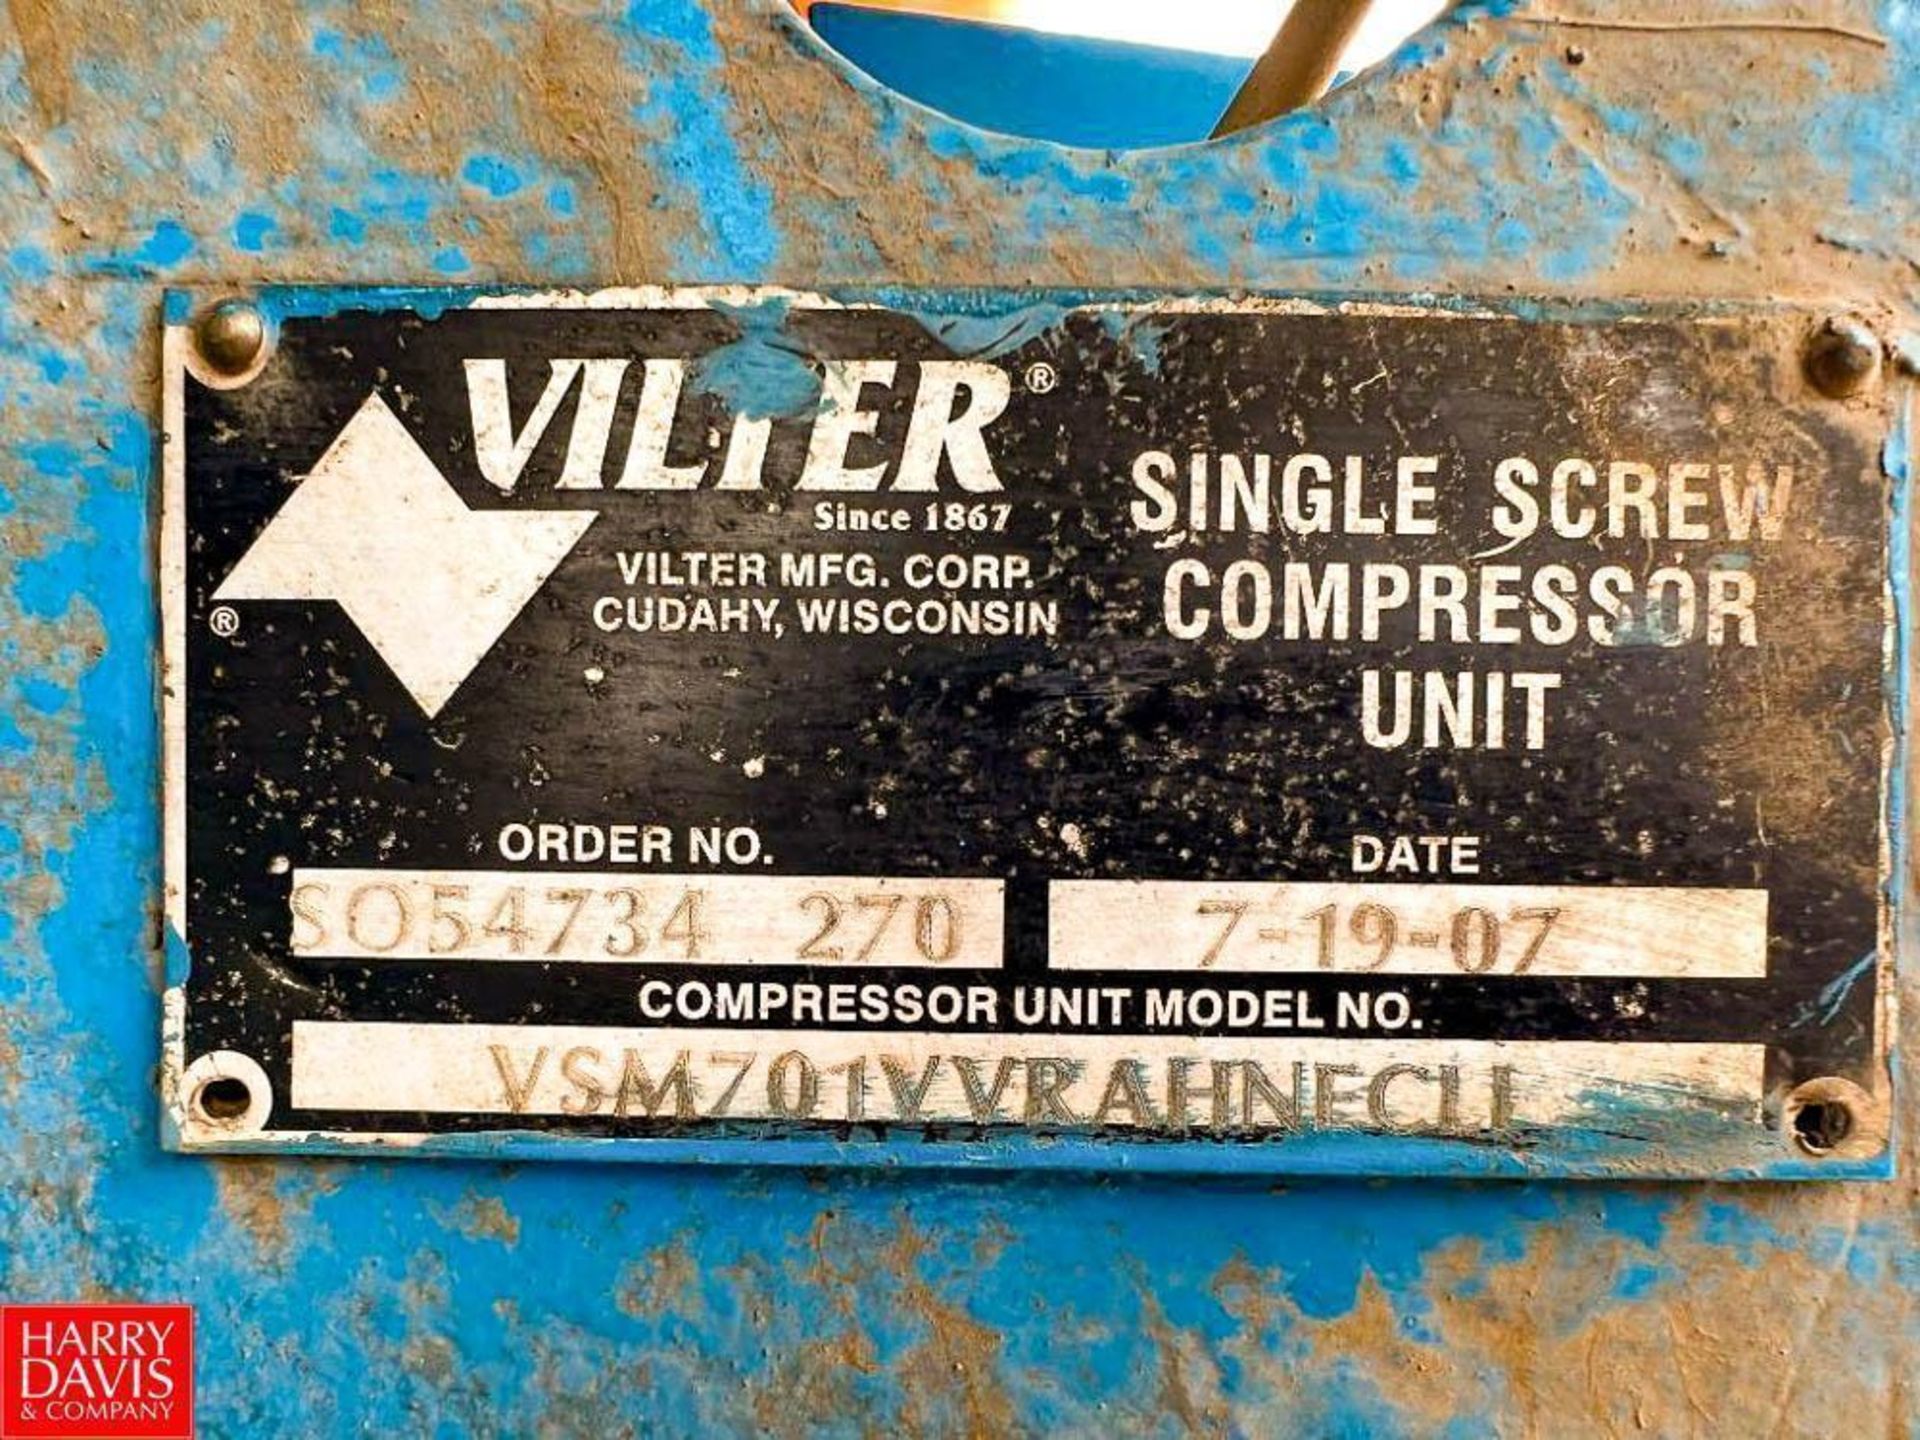 Vilter Rotary Screw Compressor, Model: VSM701 A26240CA, S/N: 3911 with 300 HP Motor and RAM Soft - Image 2 of 3